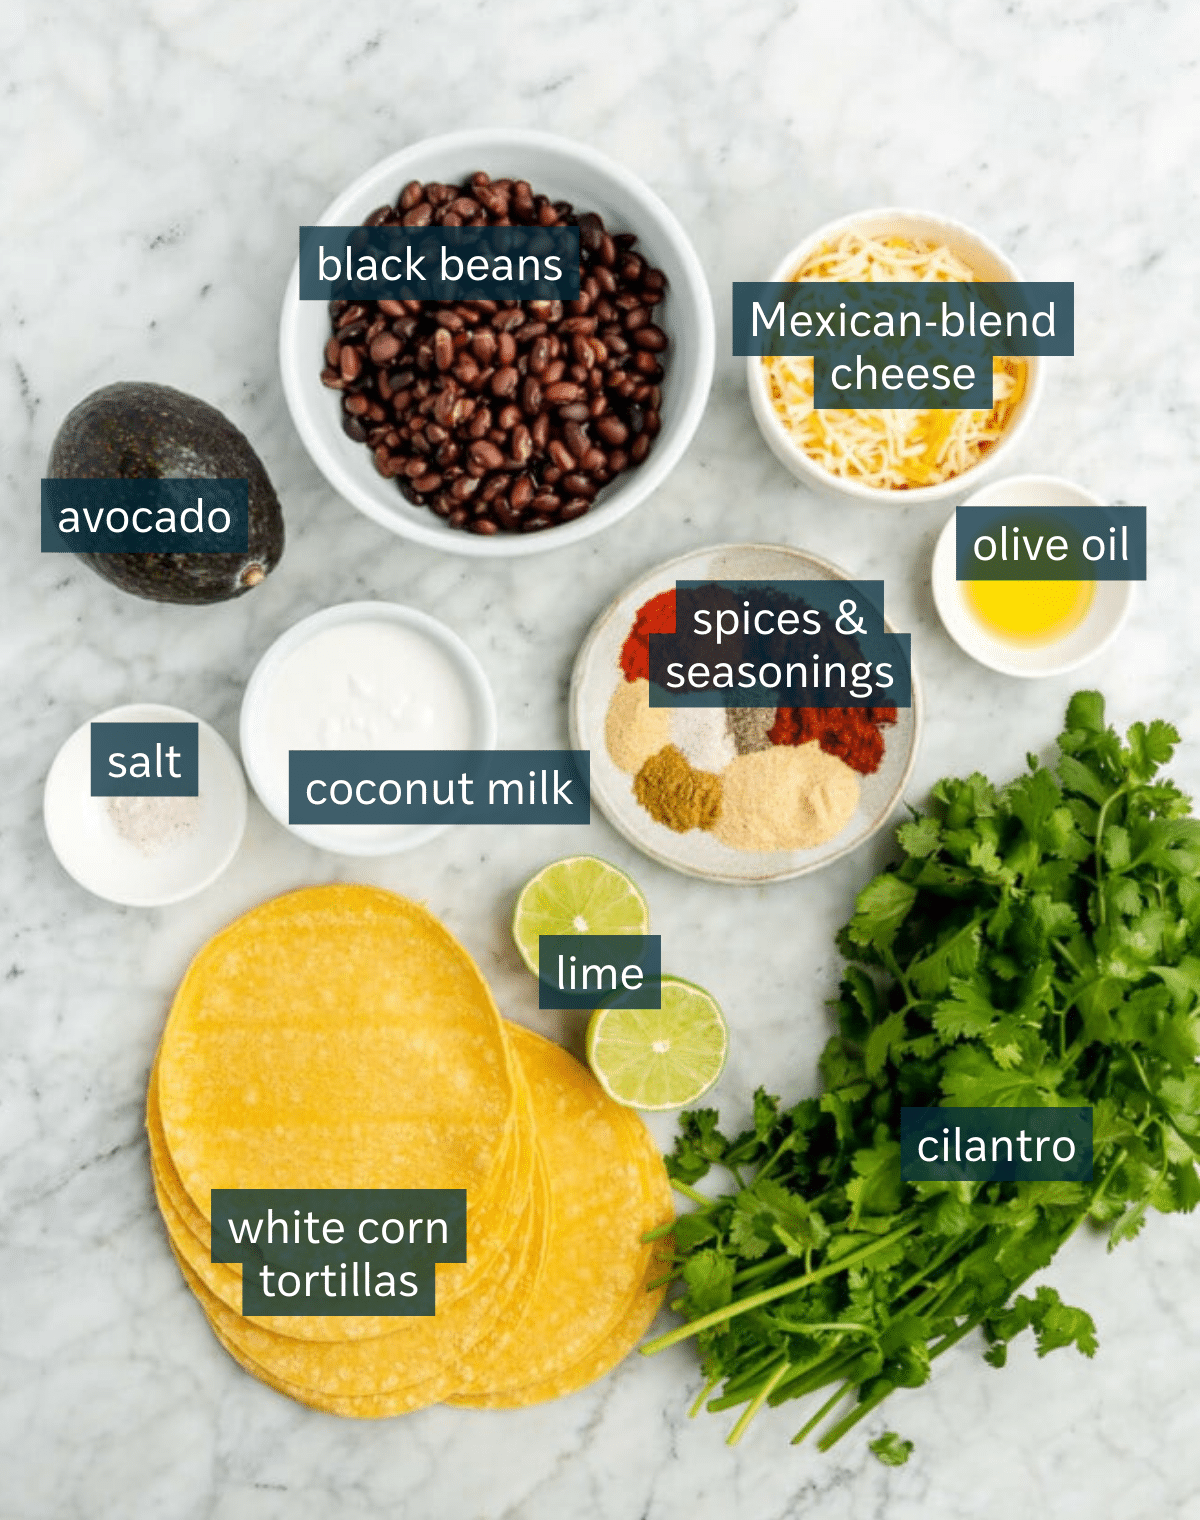 Ingredients for crispy black bean tacos sit in a variety of bowls on a marble countertop.